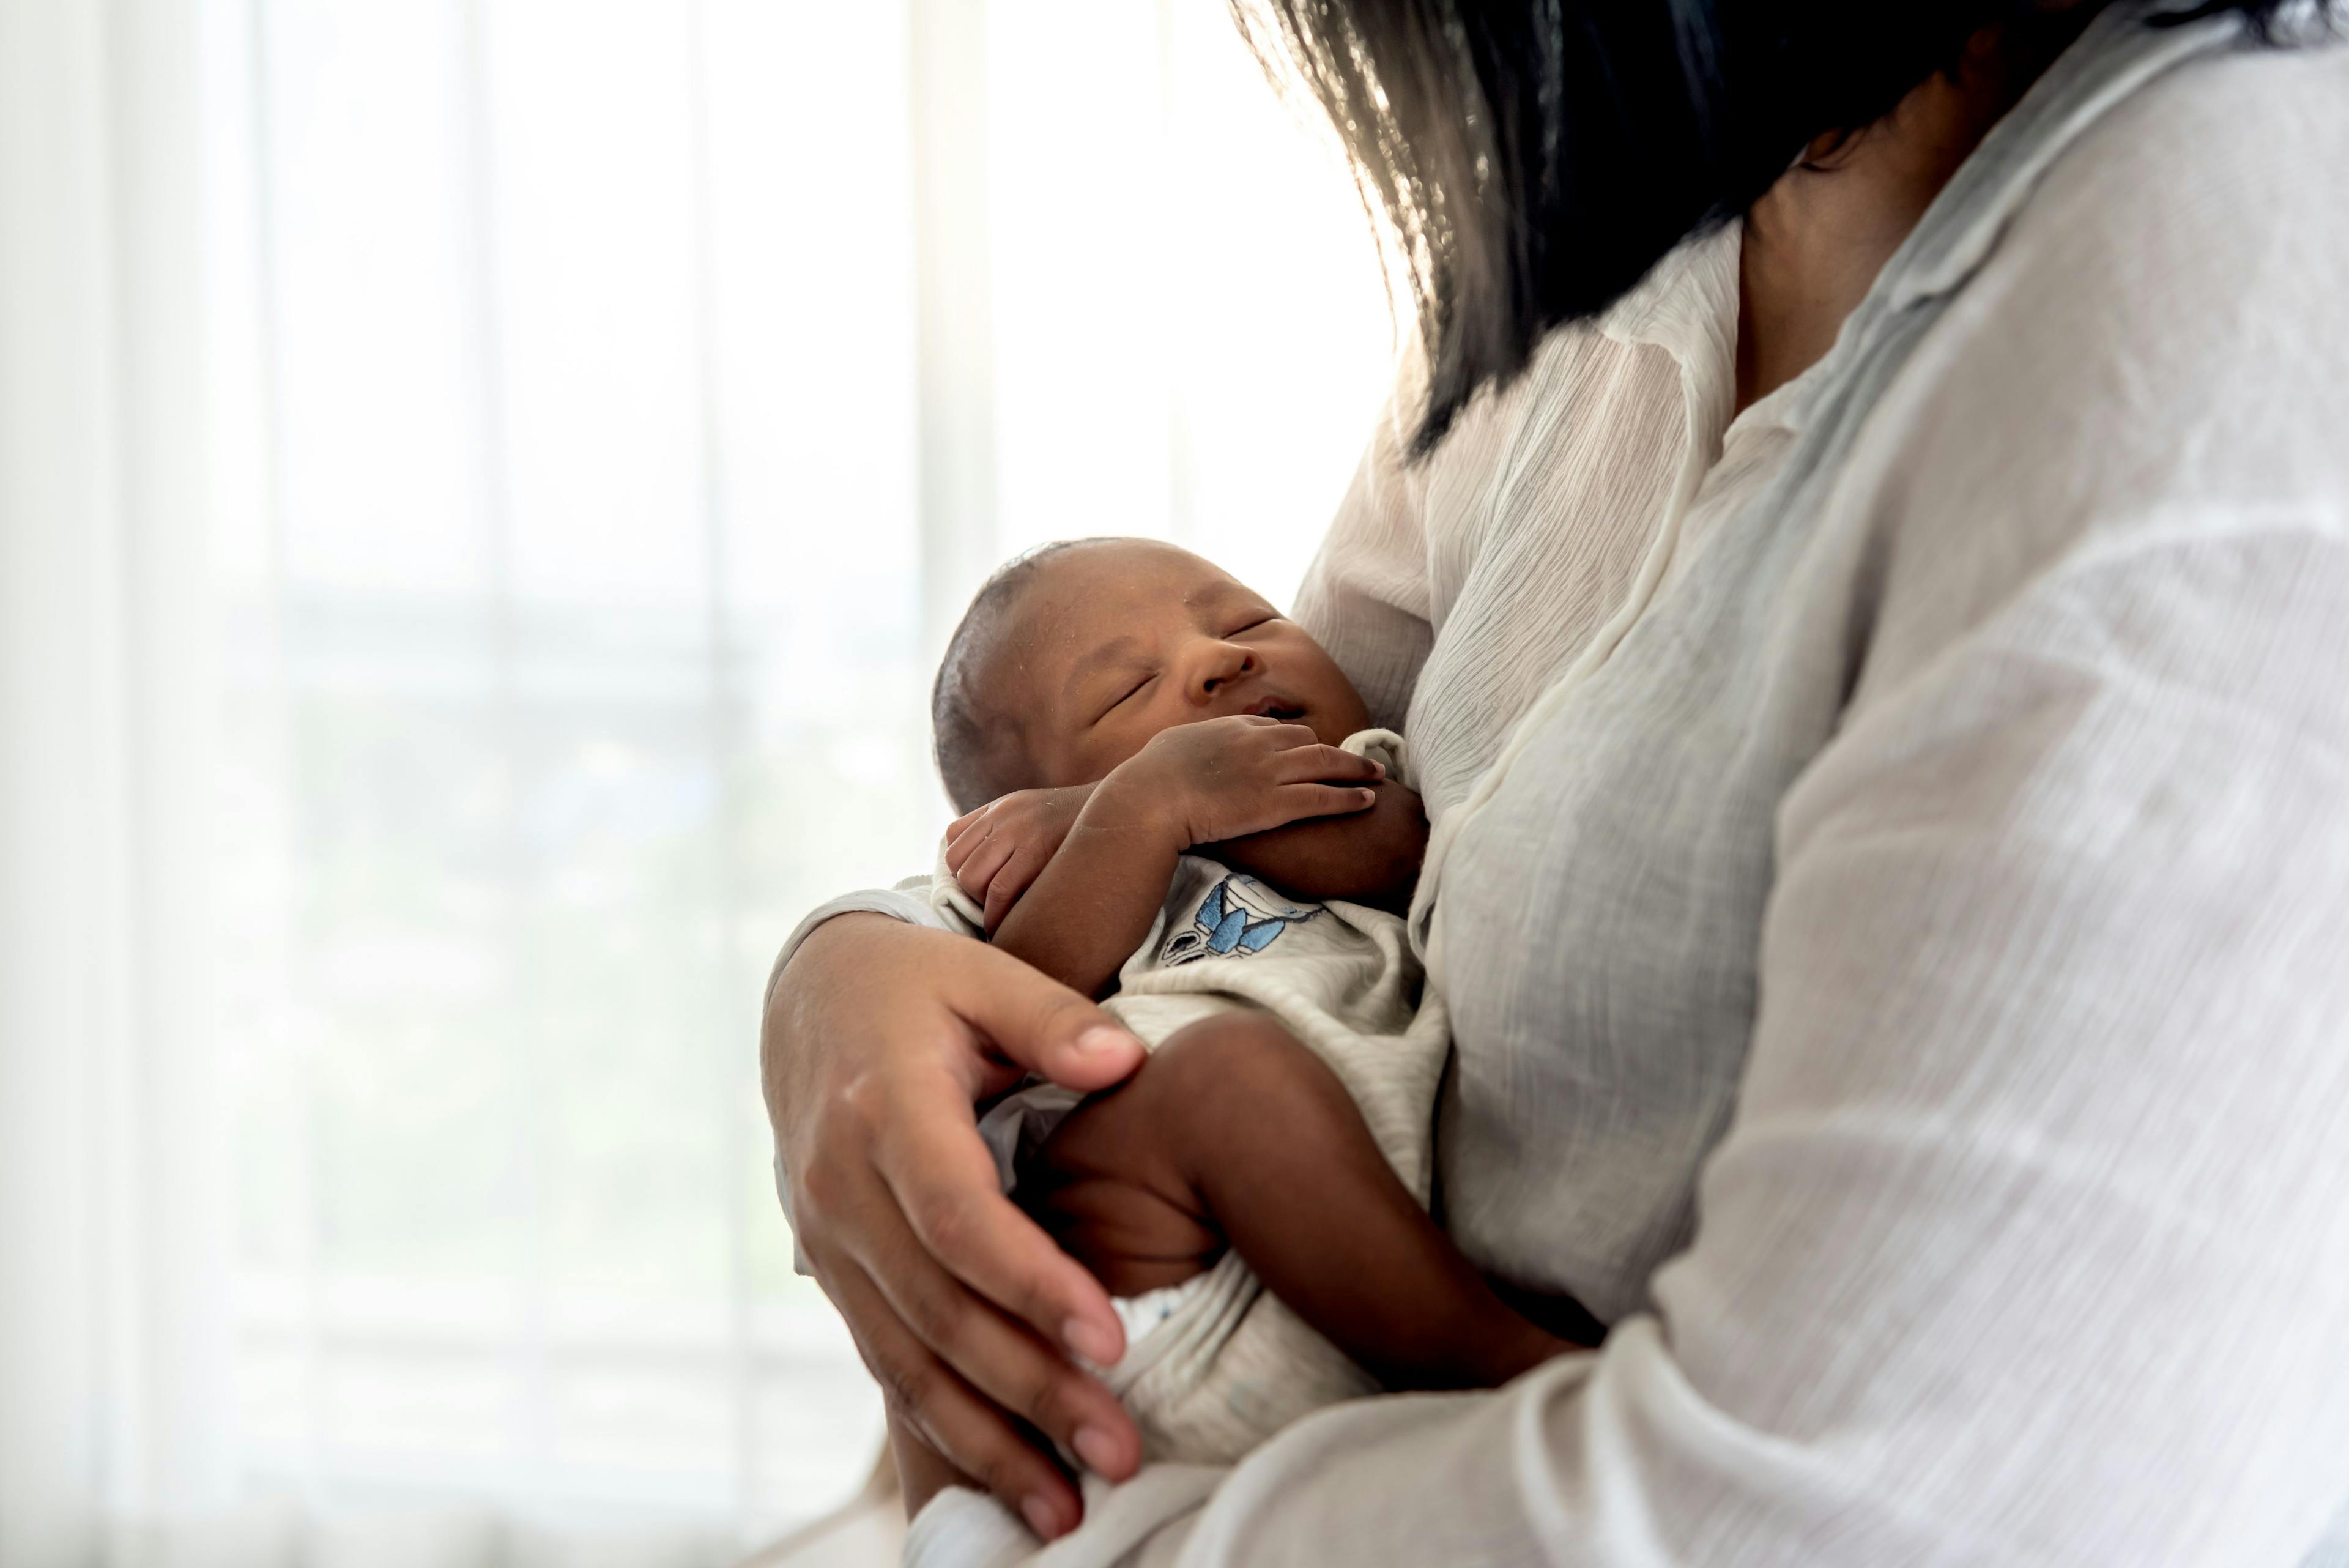 Racial inequalities in high-risk infant follow-up programs